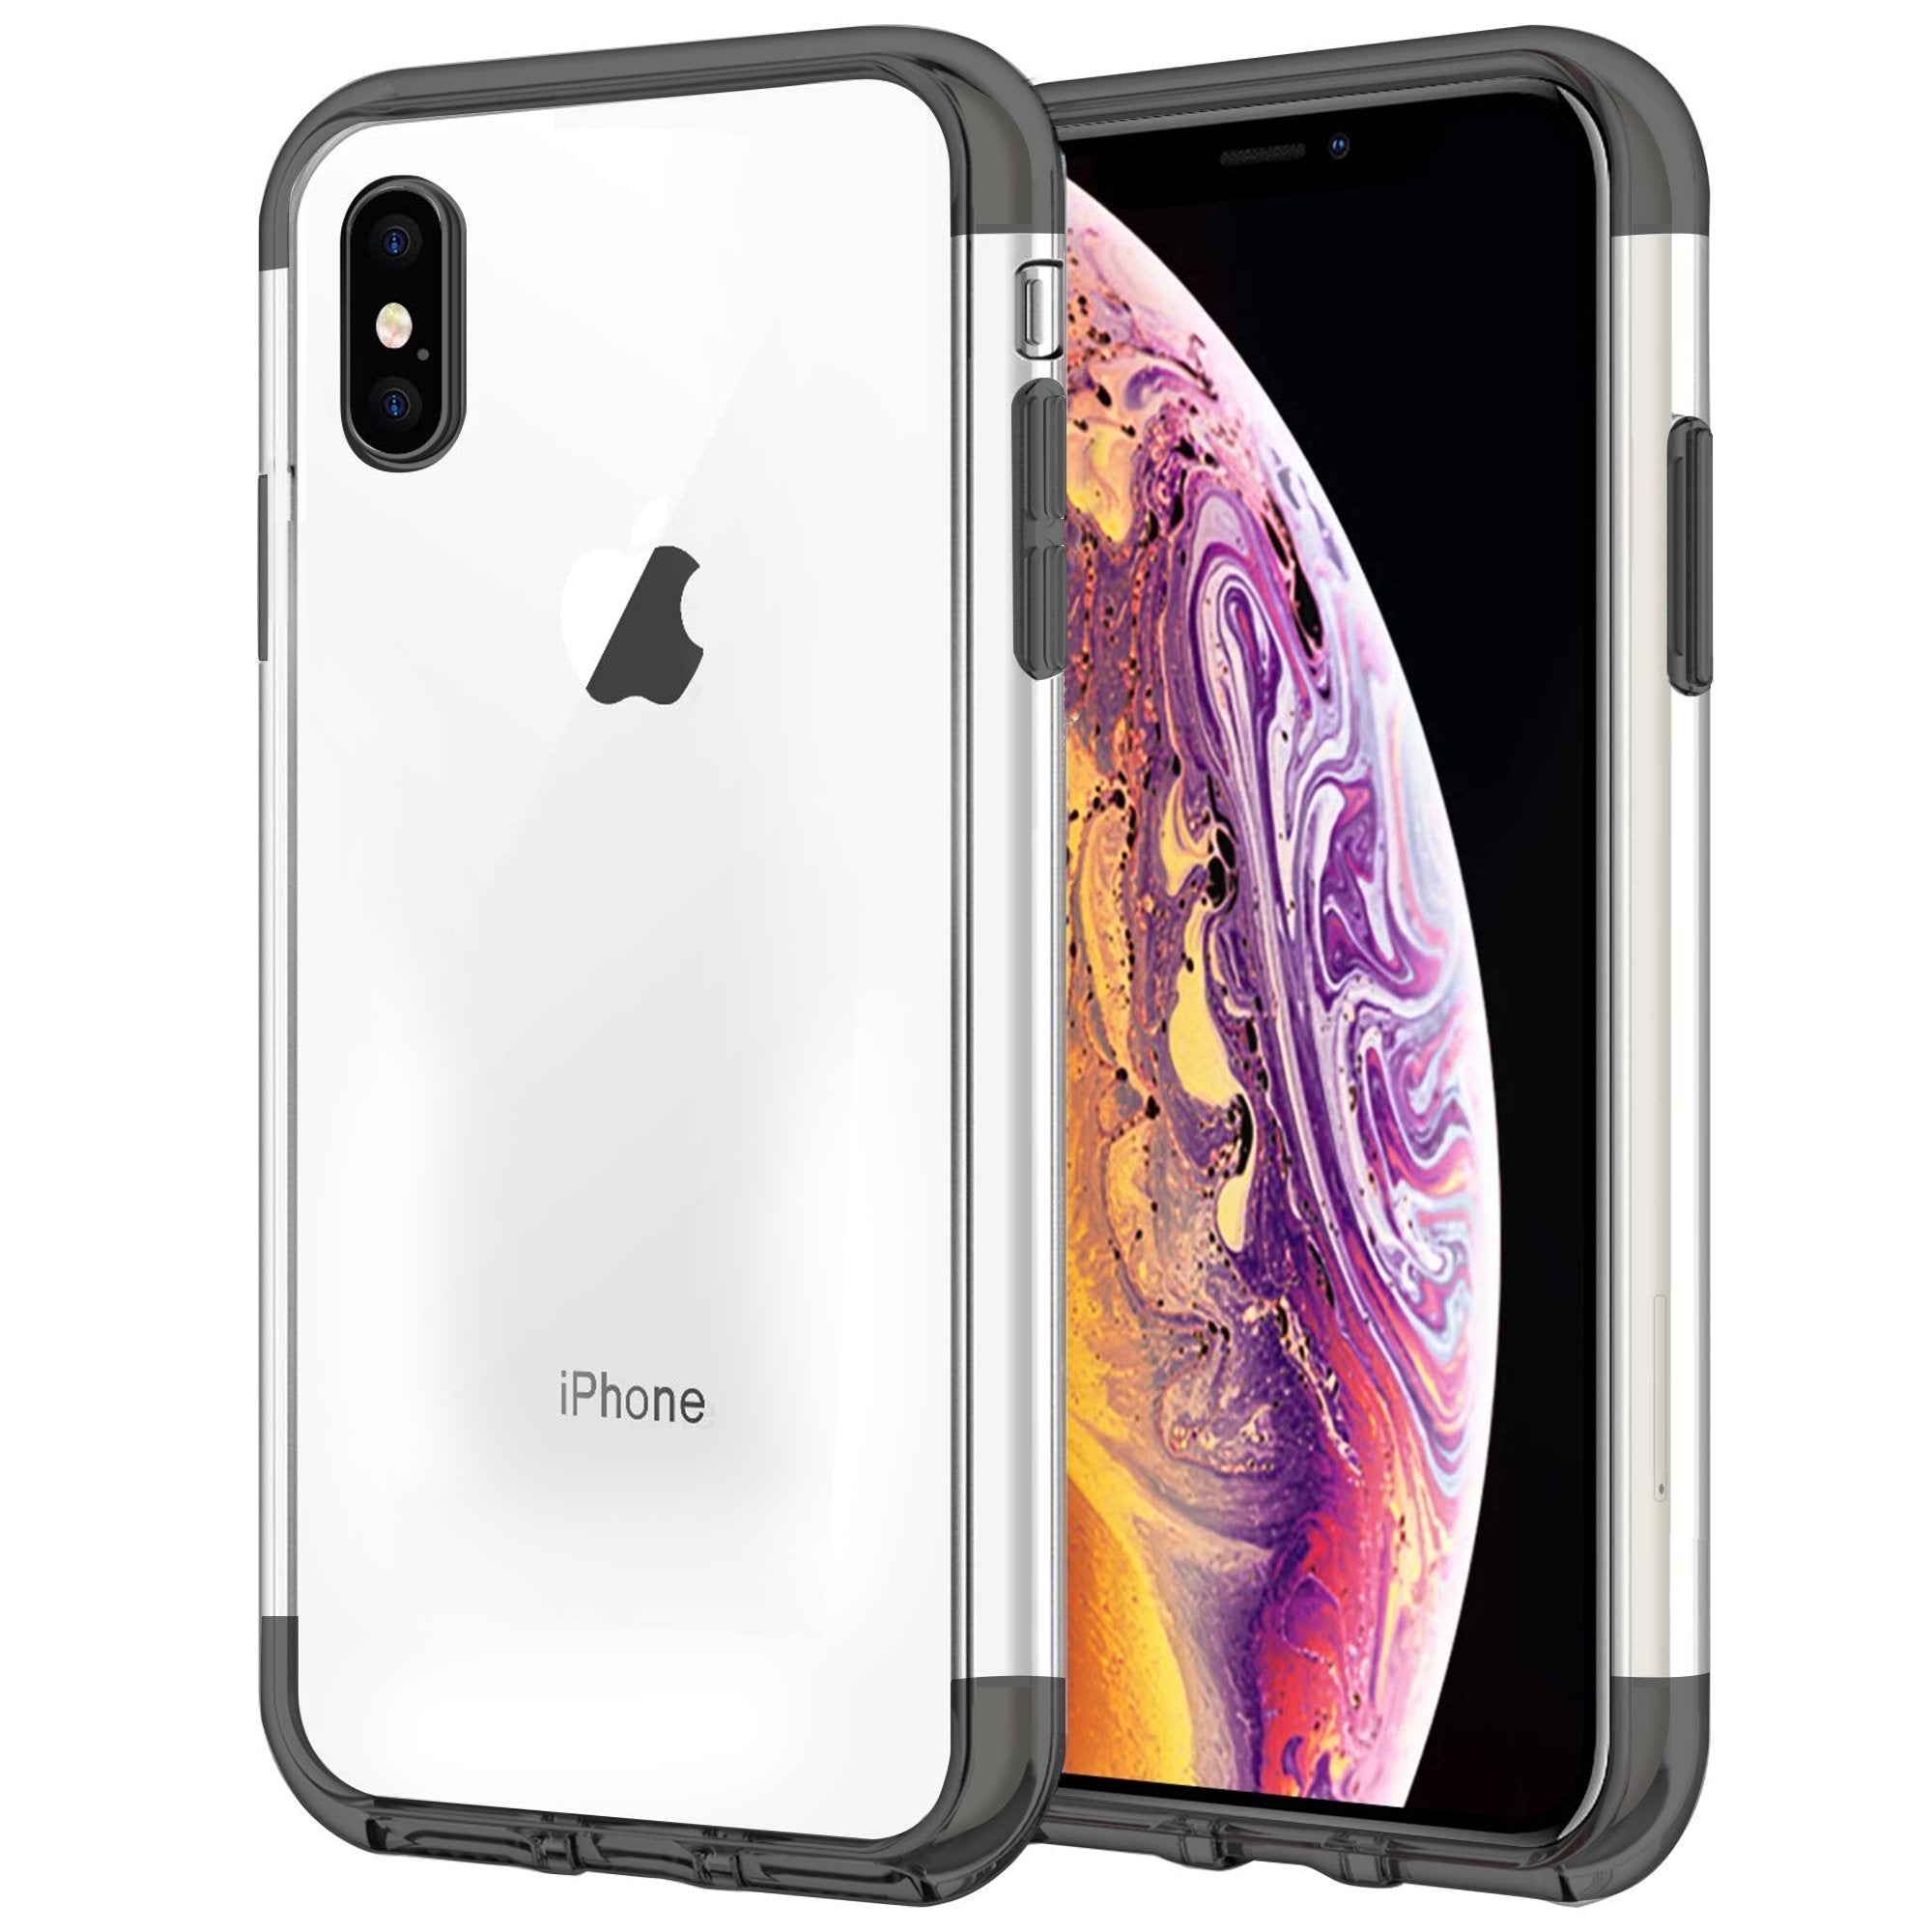 Case for iPhone XS Shock Proof Soft TPU Silicone Phone Clear Slim Cover